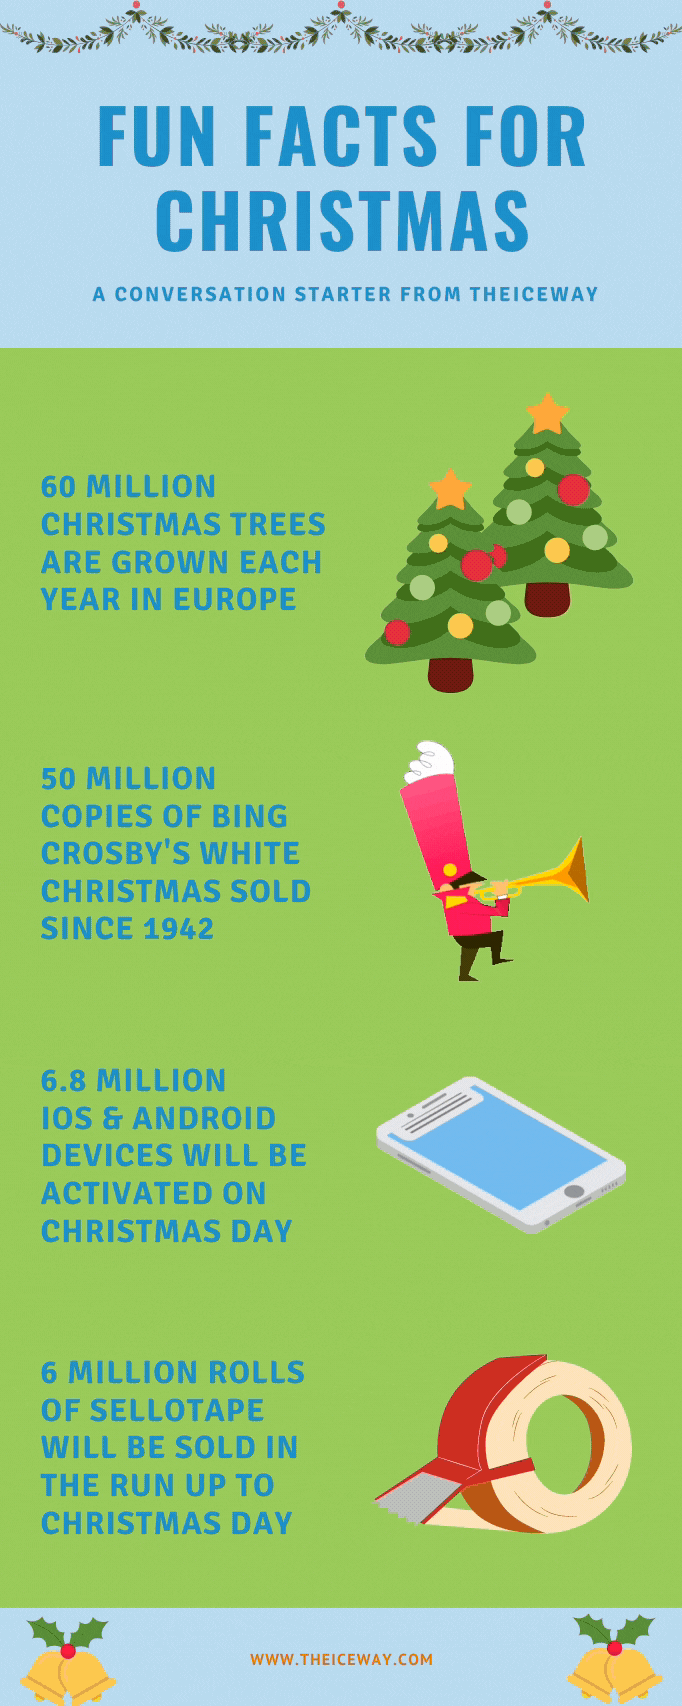 theICEway Christmas Facts 2020 Infographic